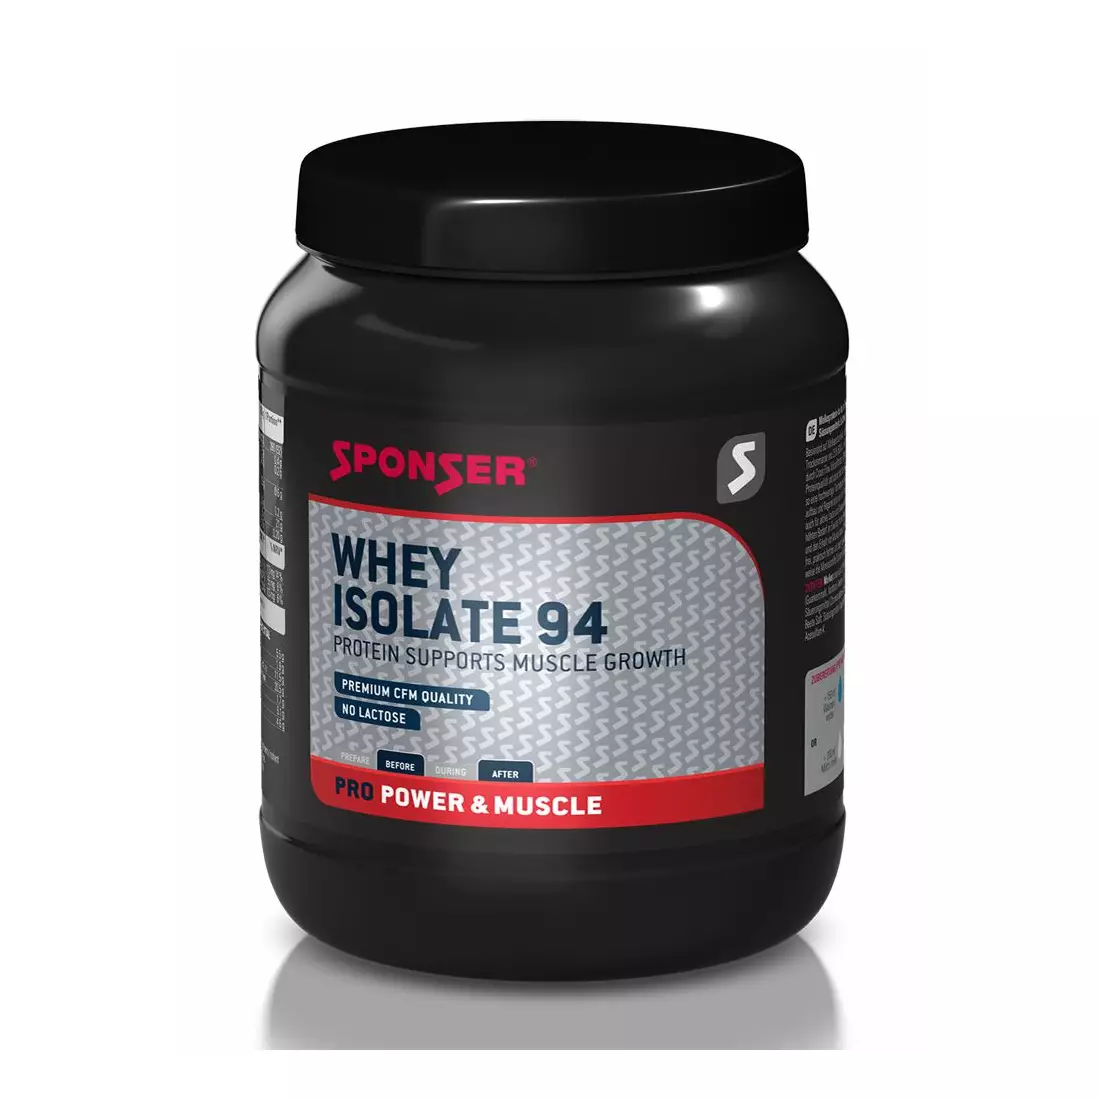 Strawberry conditioner SPONSER WHEY 94 can 425g